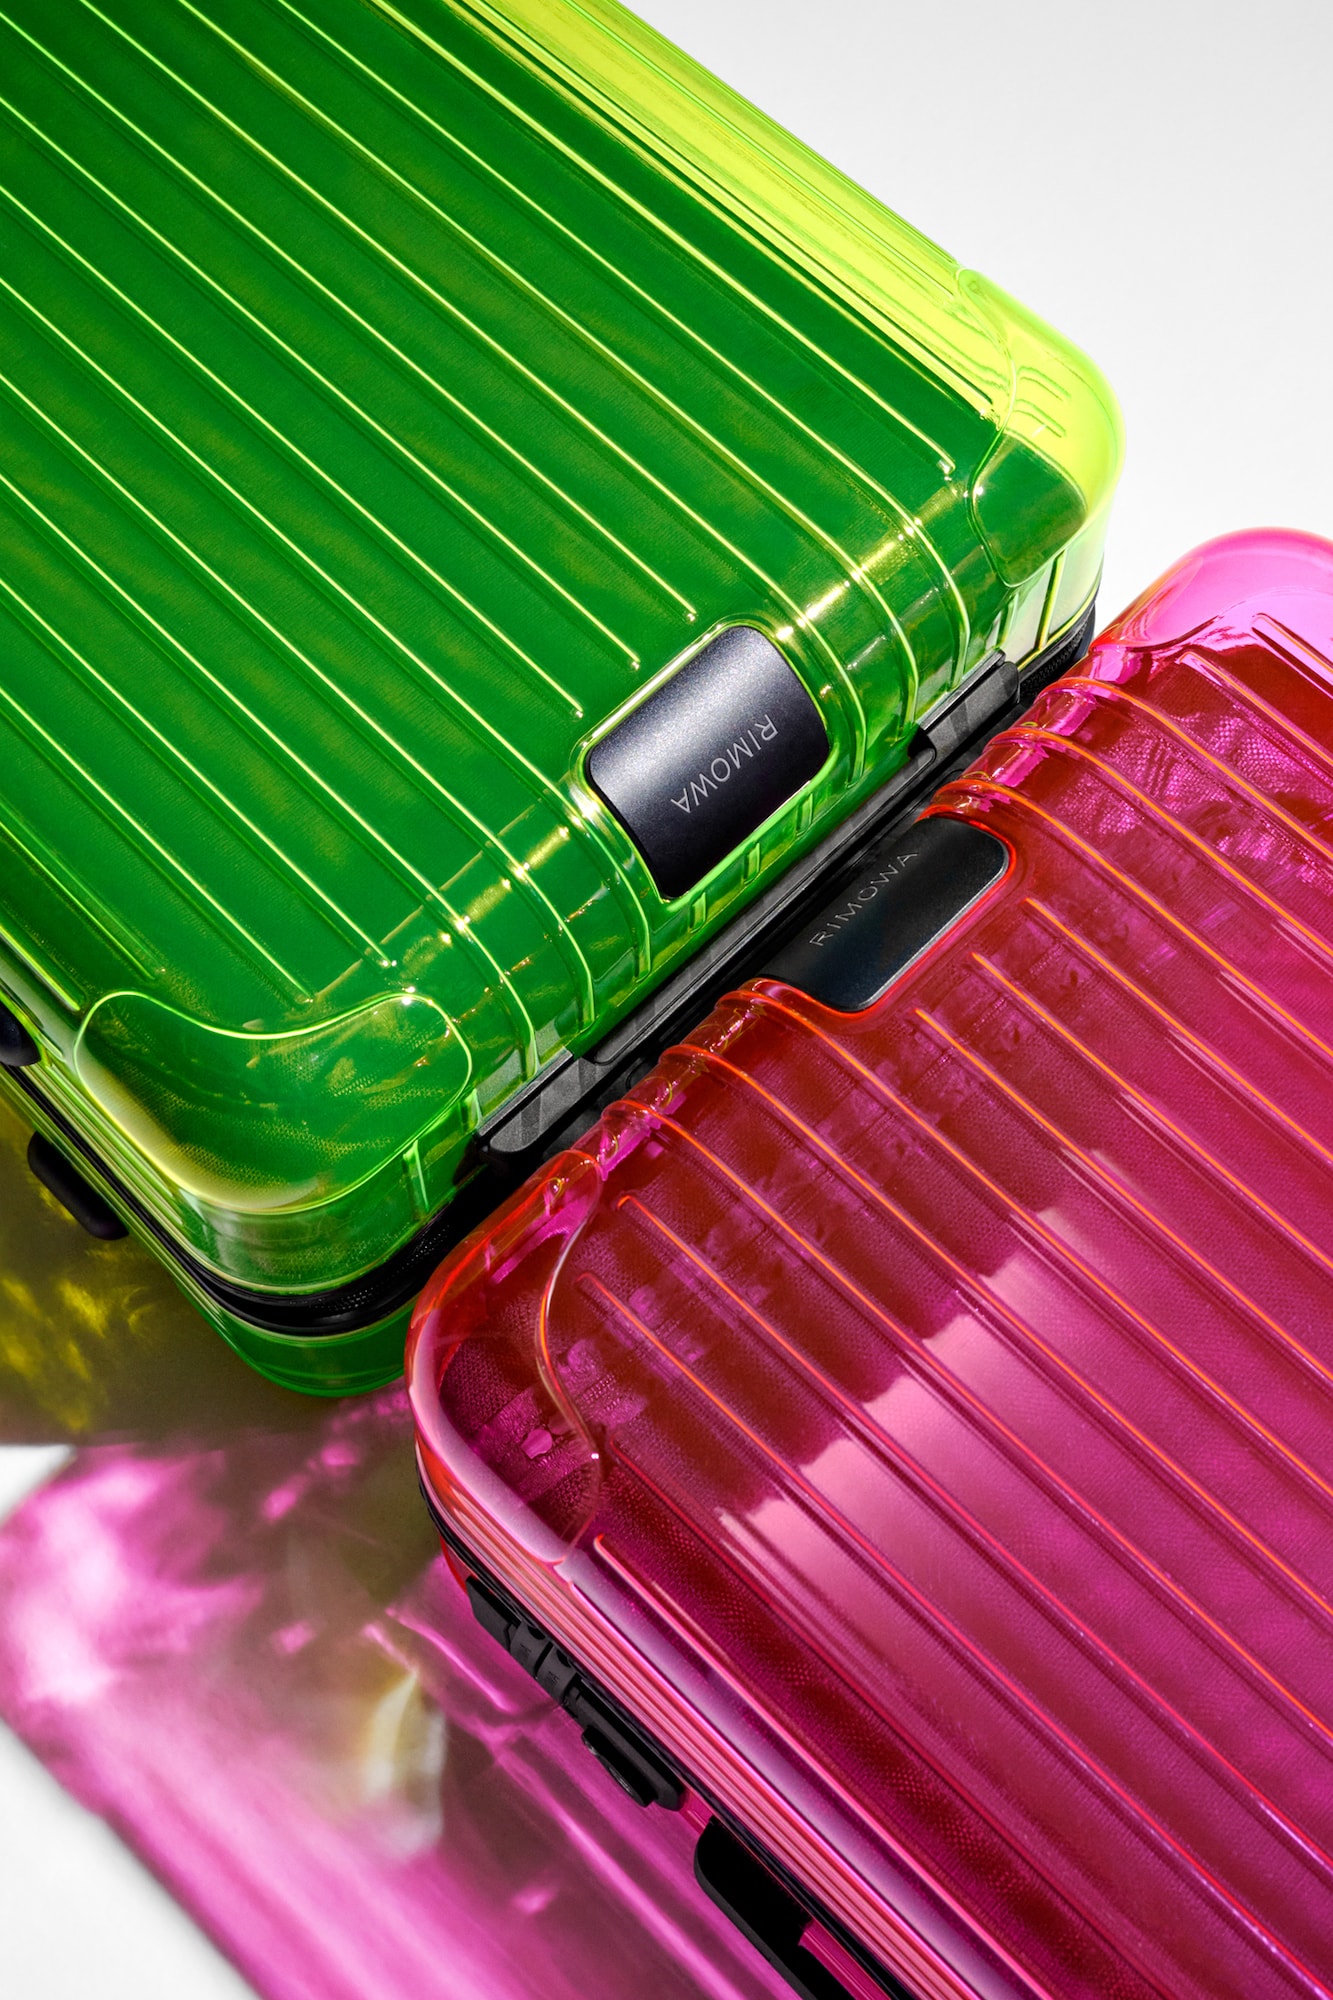 RIMOWA Releases New Neon Suitcase Range Pink Lime Transparent Travel Bags